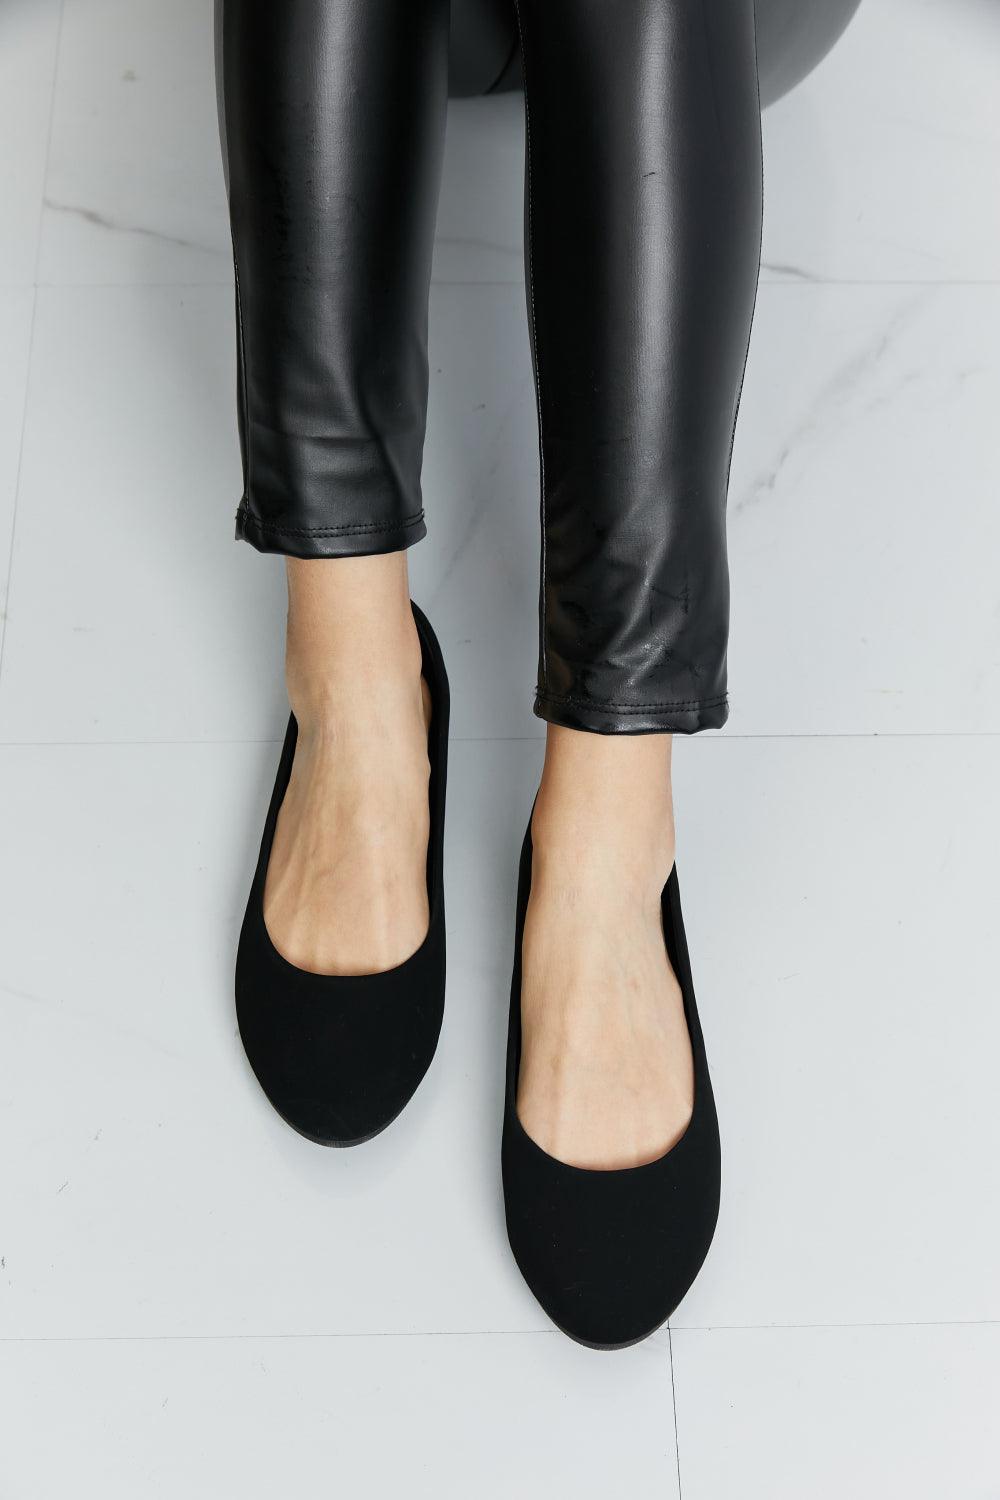 Forever Link Meet You There Flats in Black - Glamorous Boutique USA L.L.C.